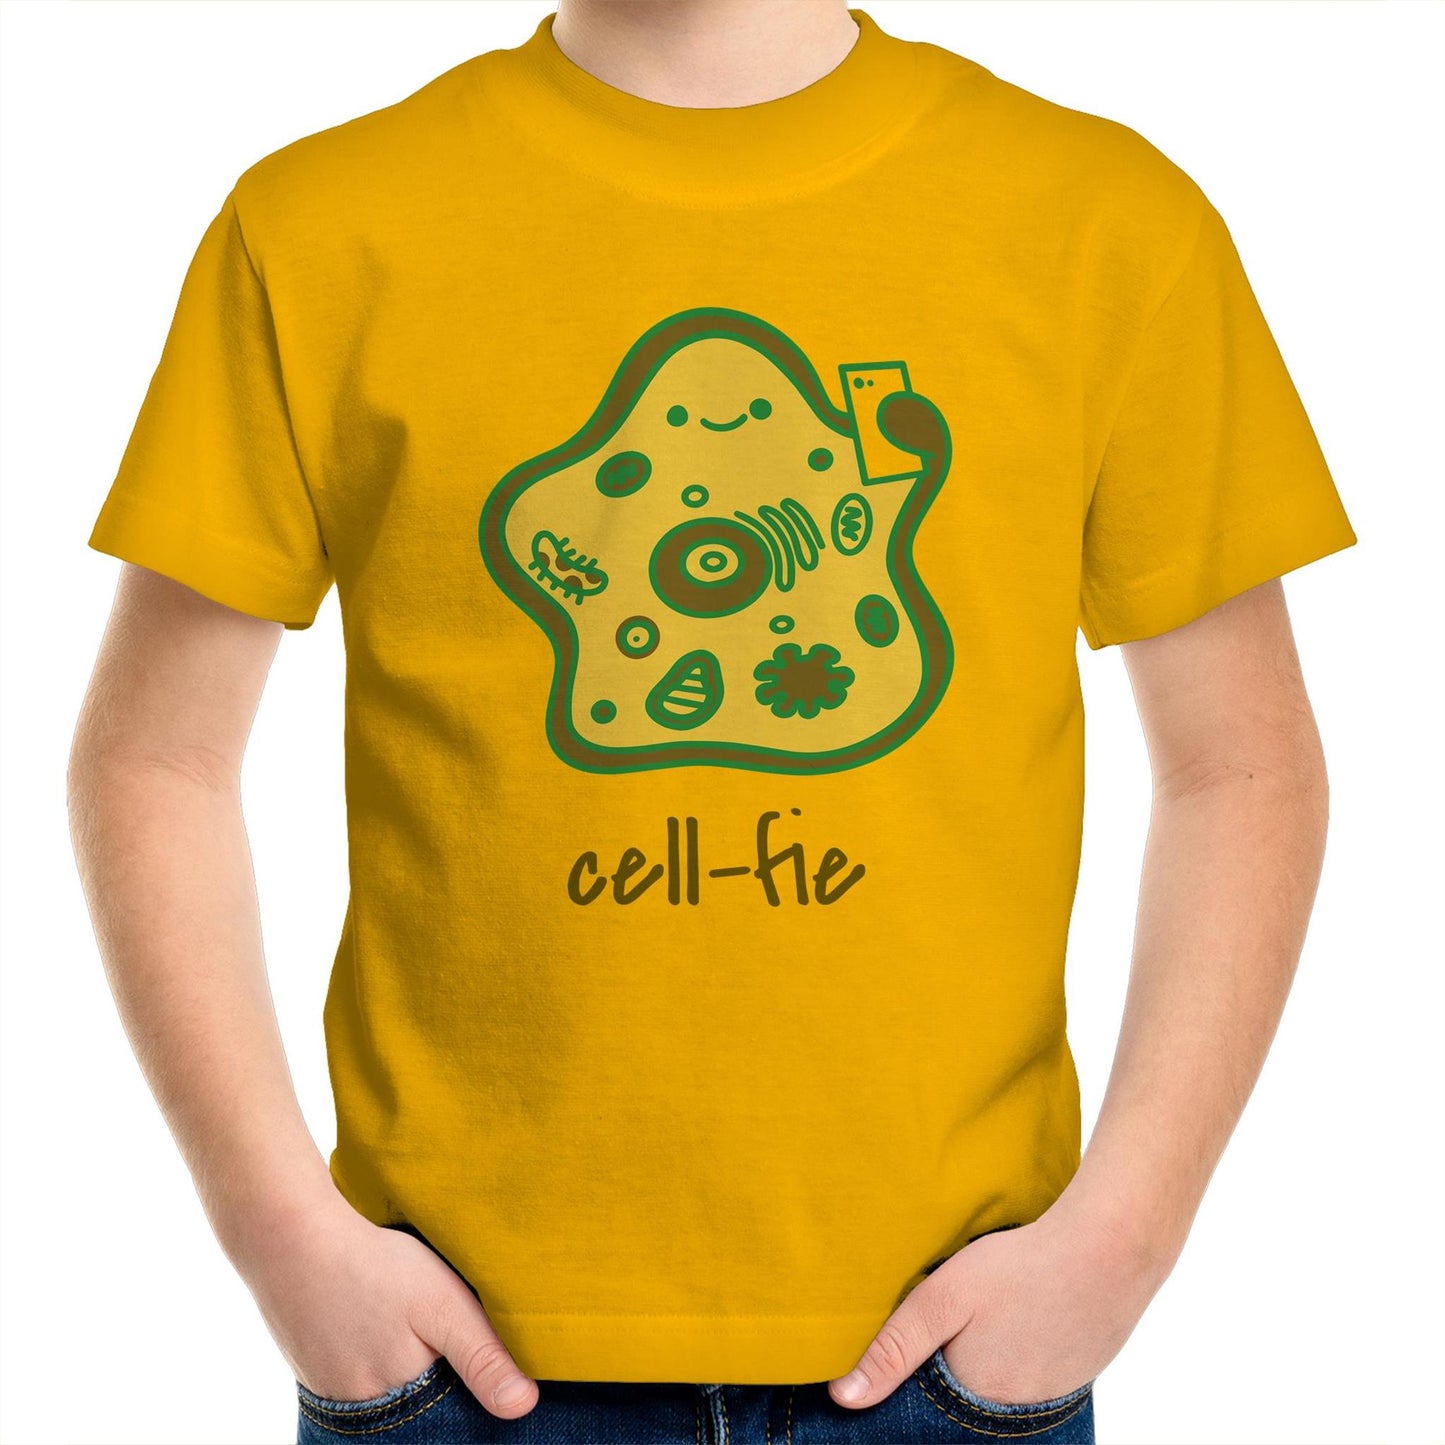 Cell-fie - Kids Youth Crew T-Shirt Gold Kids Youth T-shirt Science